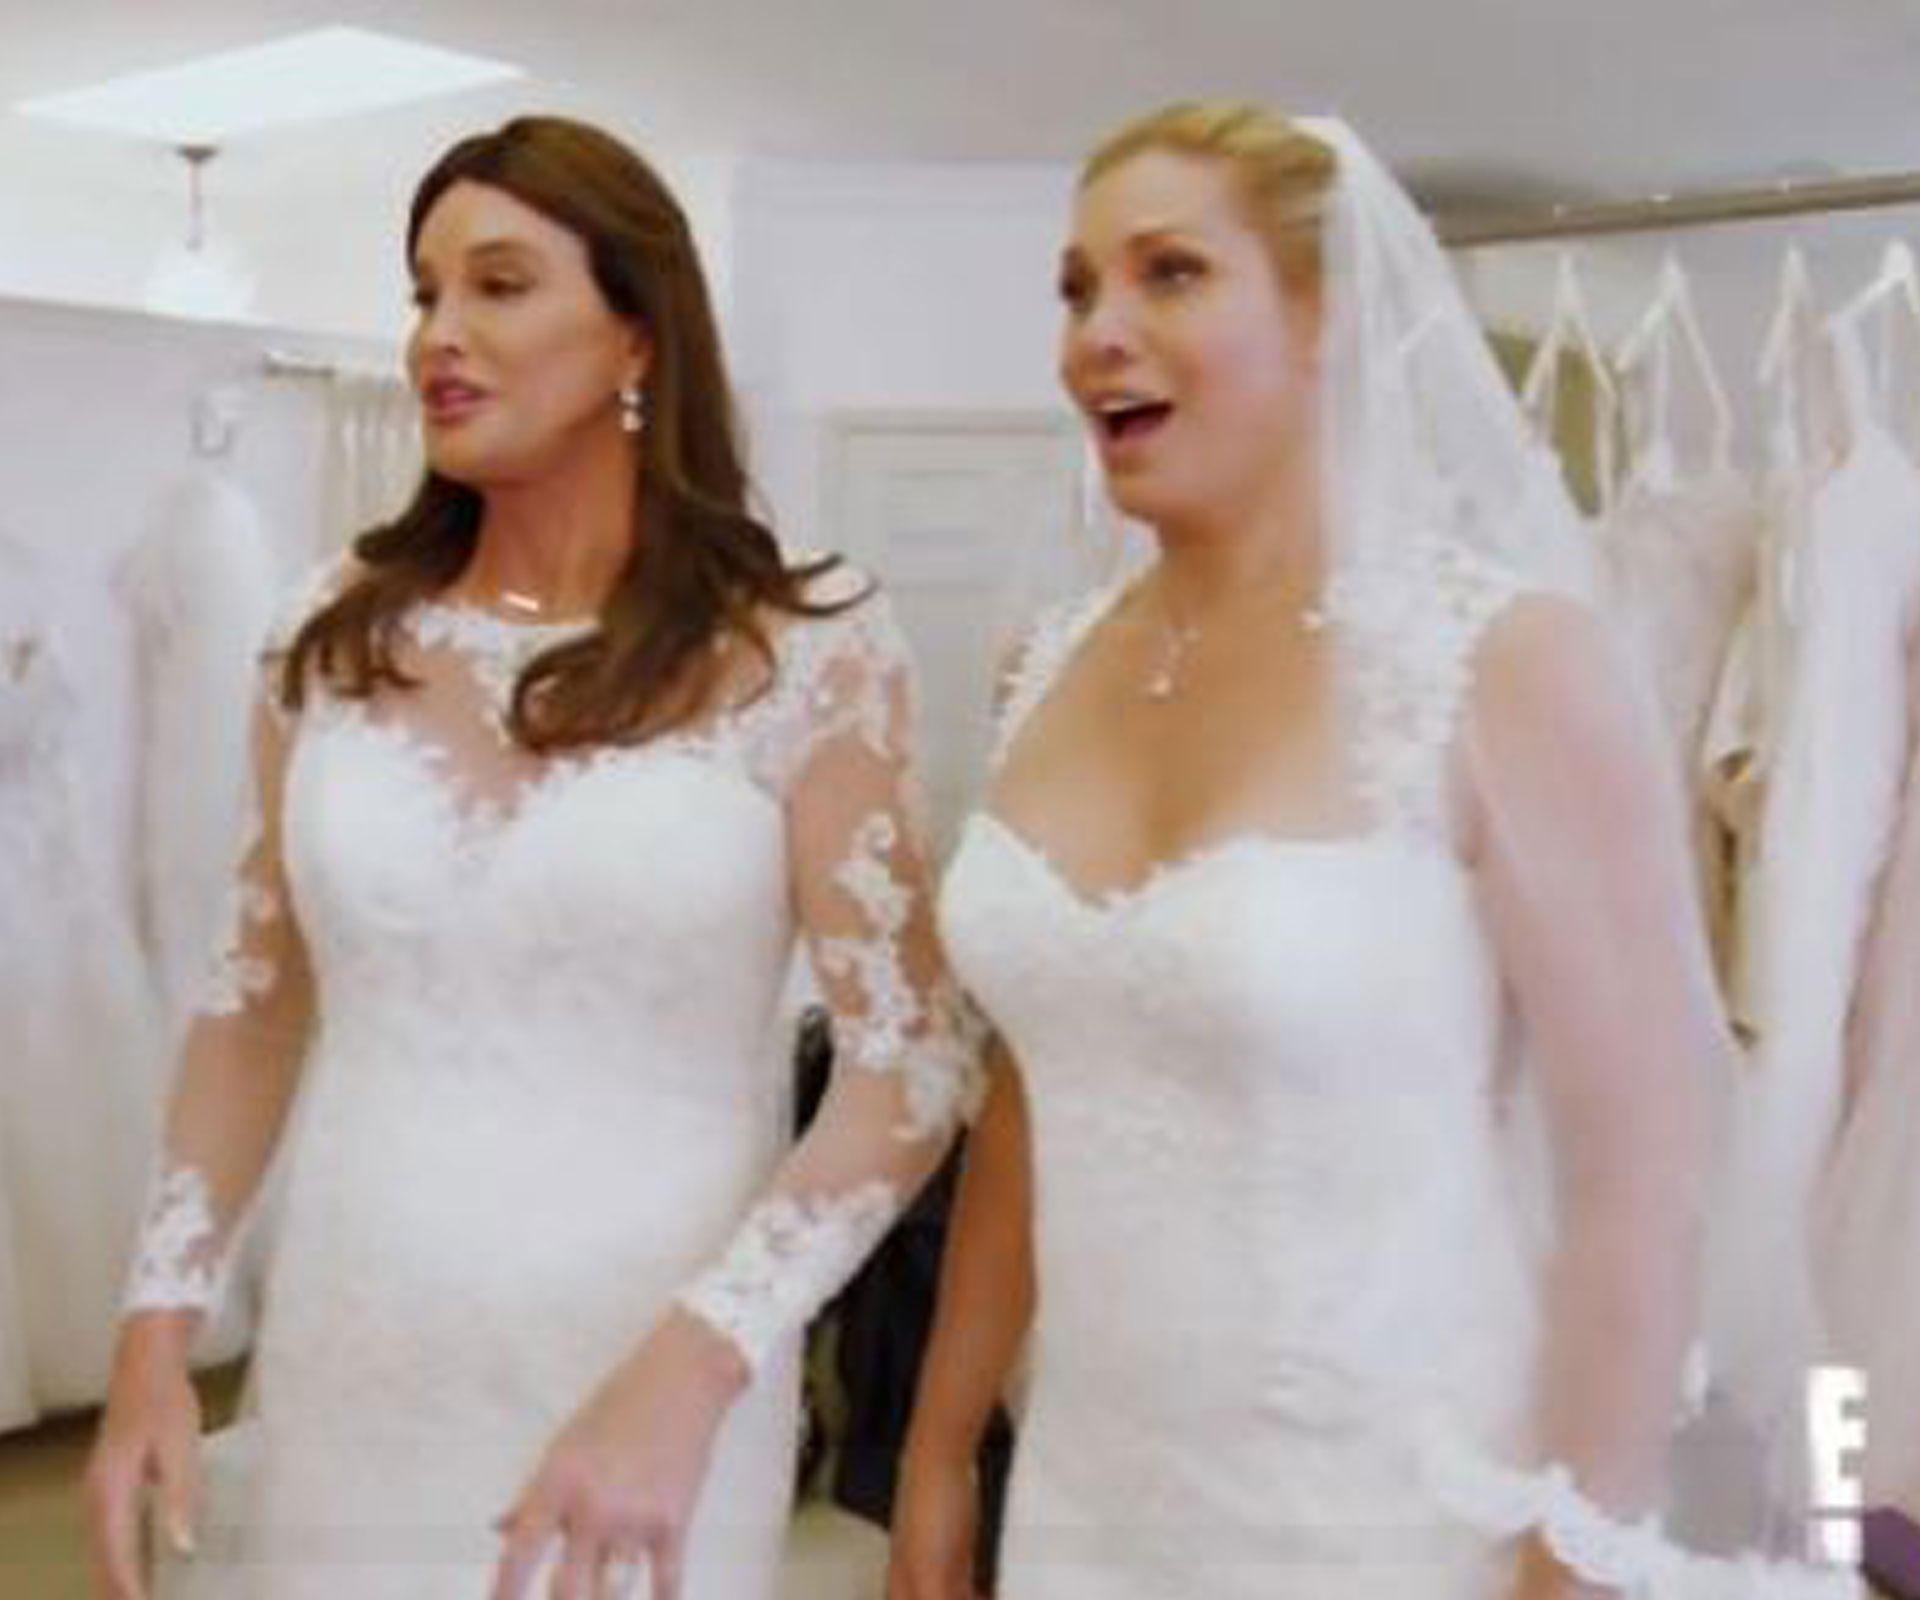 Caitlyn Jenner’s emotional moment as she slips into wedding gown